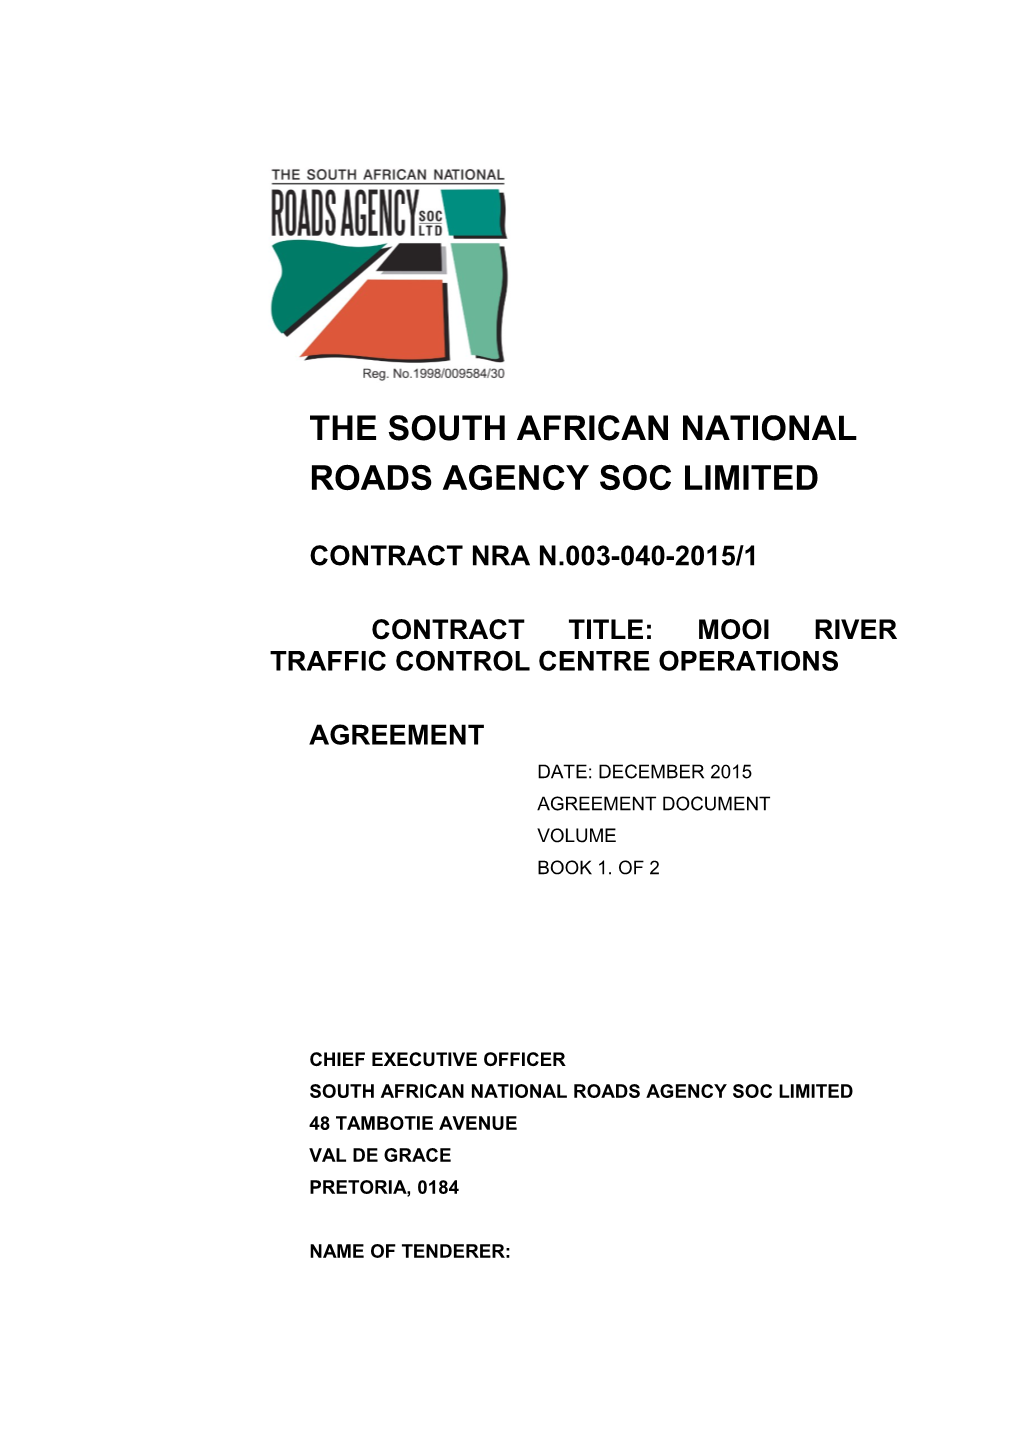 The South African National